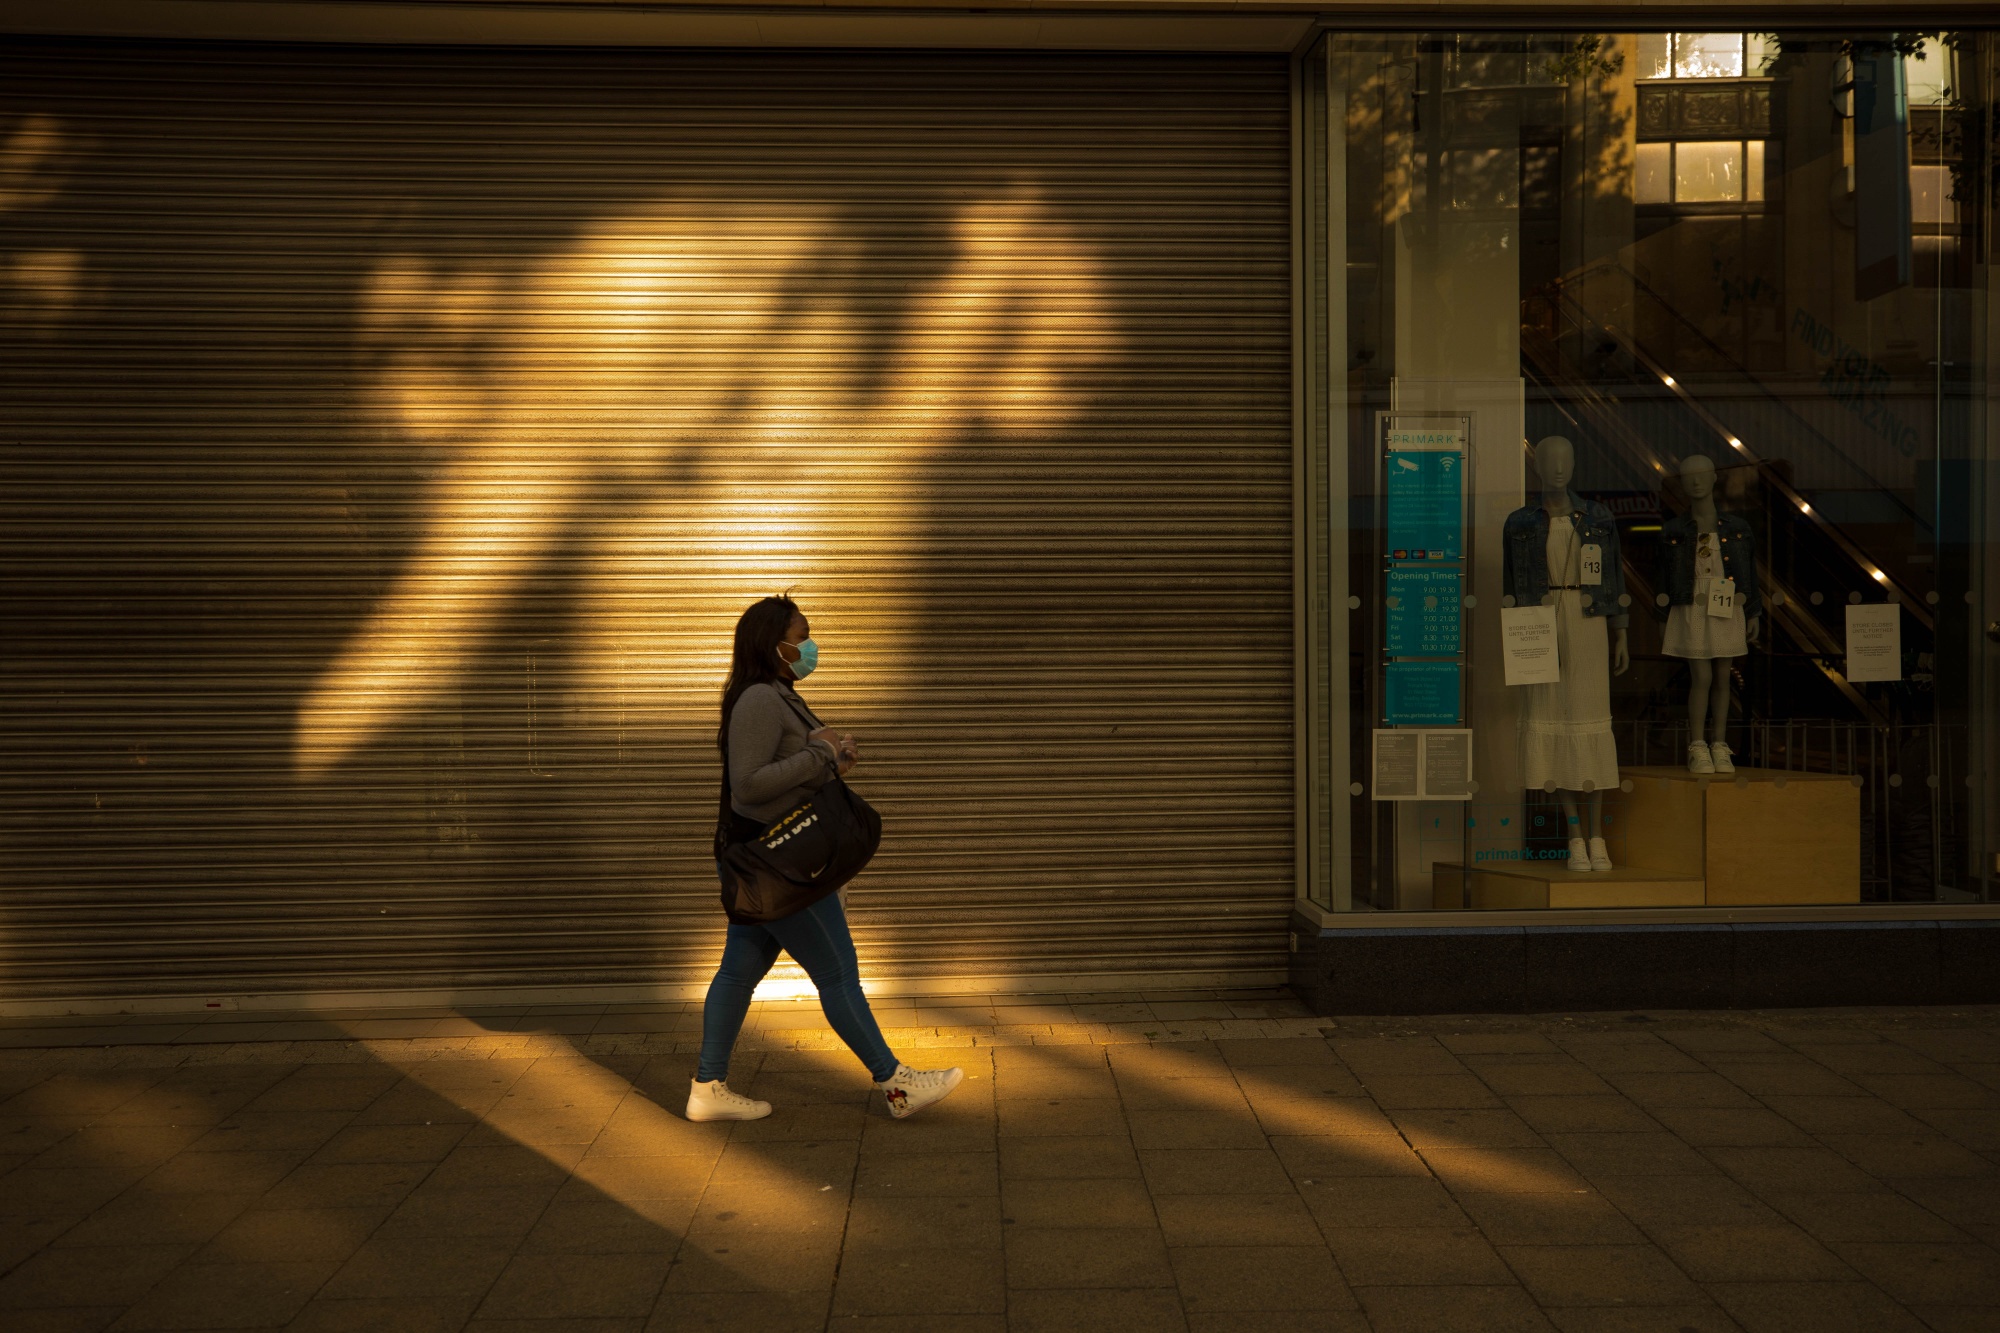 A pedestrian passes the shuttered entrance to a store in Croydon, U.K.